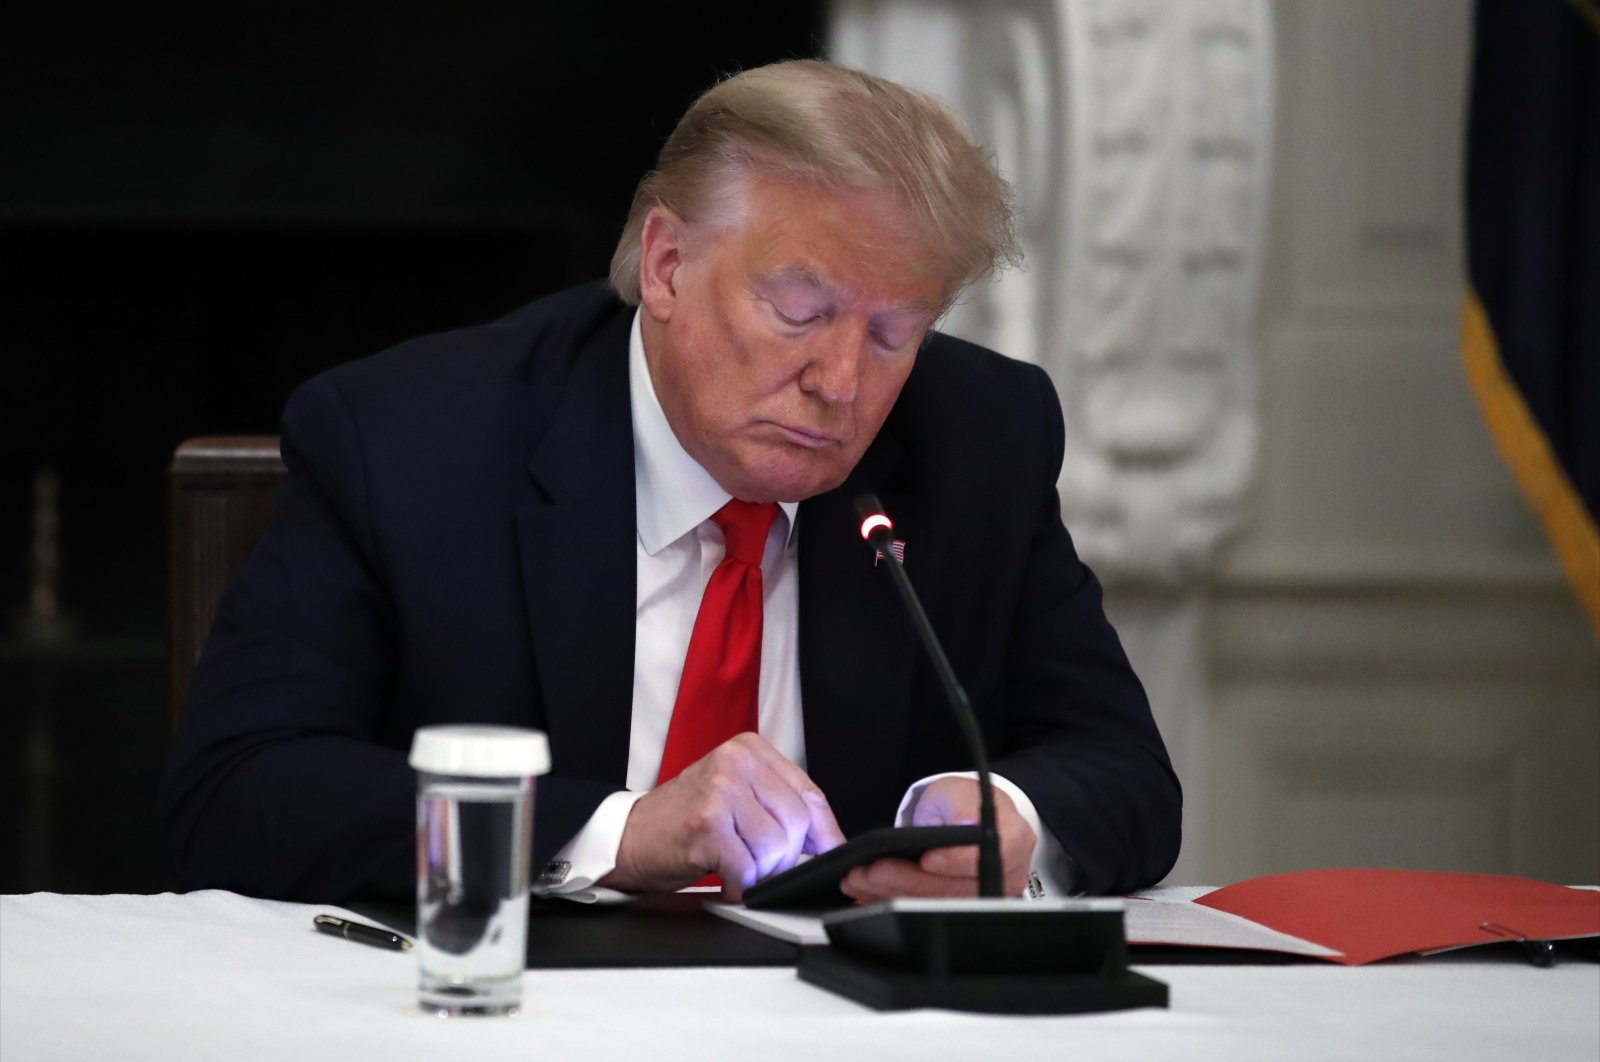 U.S. President Donald Trump looks at his phone during a roundtable at the White House, Washington, D.C., U.S., June 18, 2020. (AP Photo)